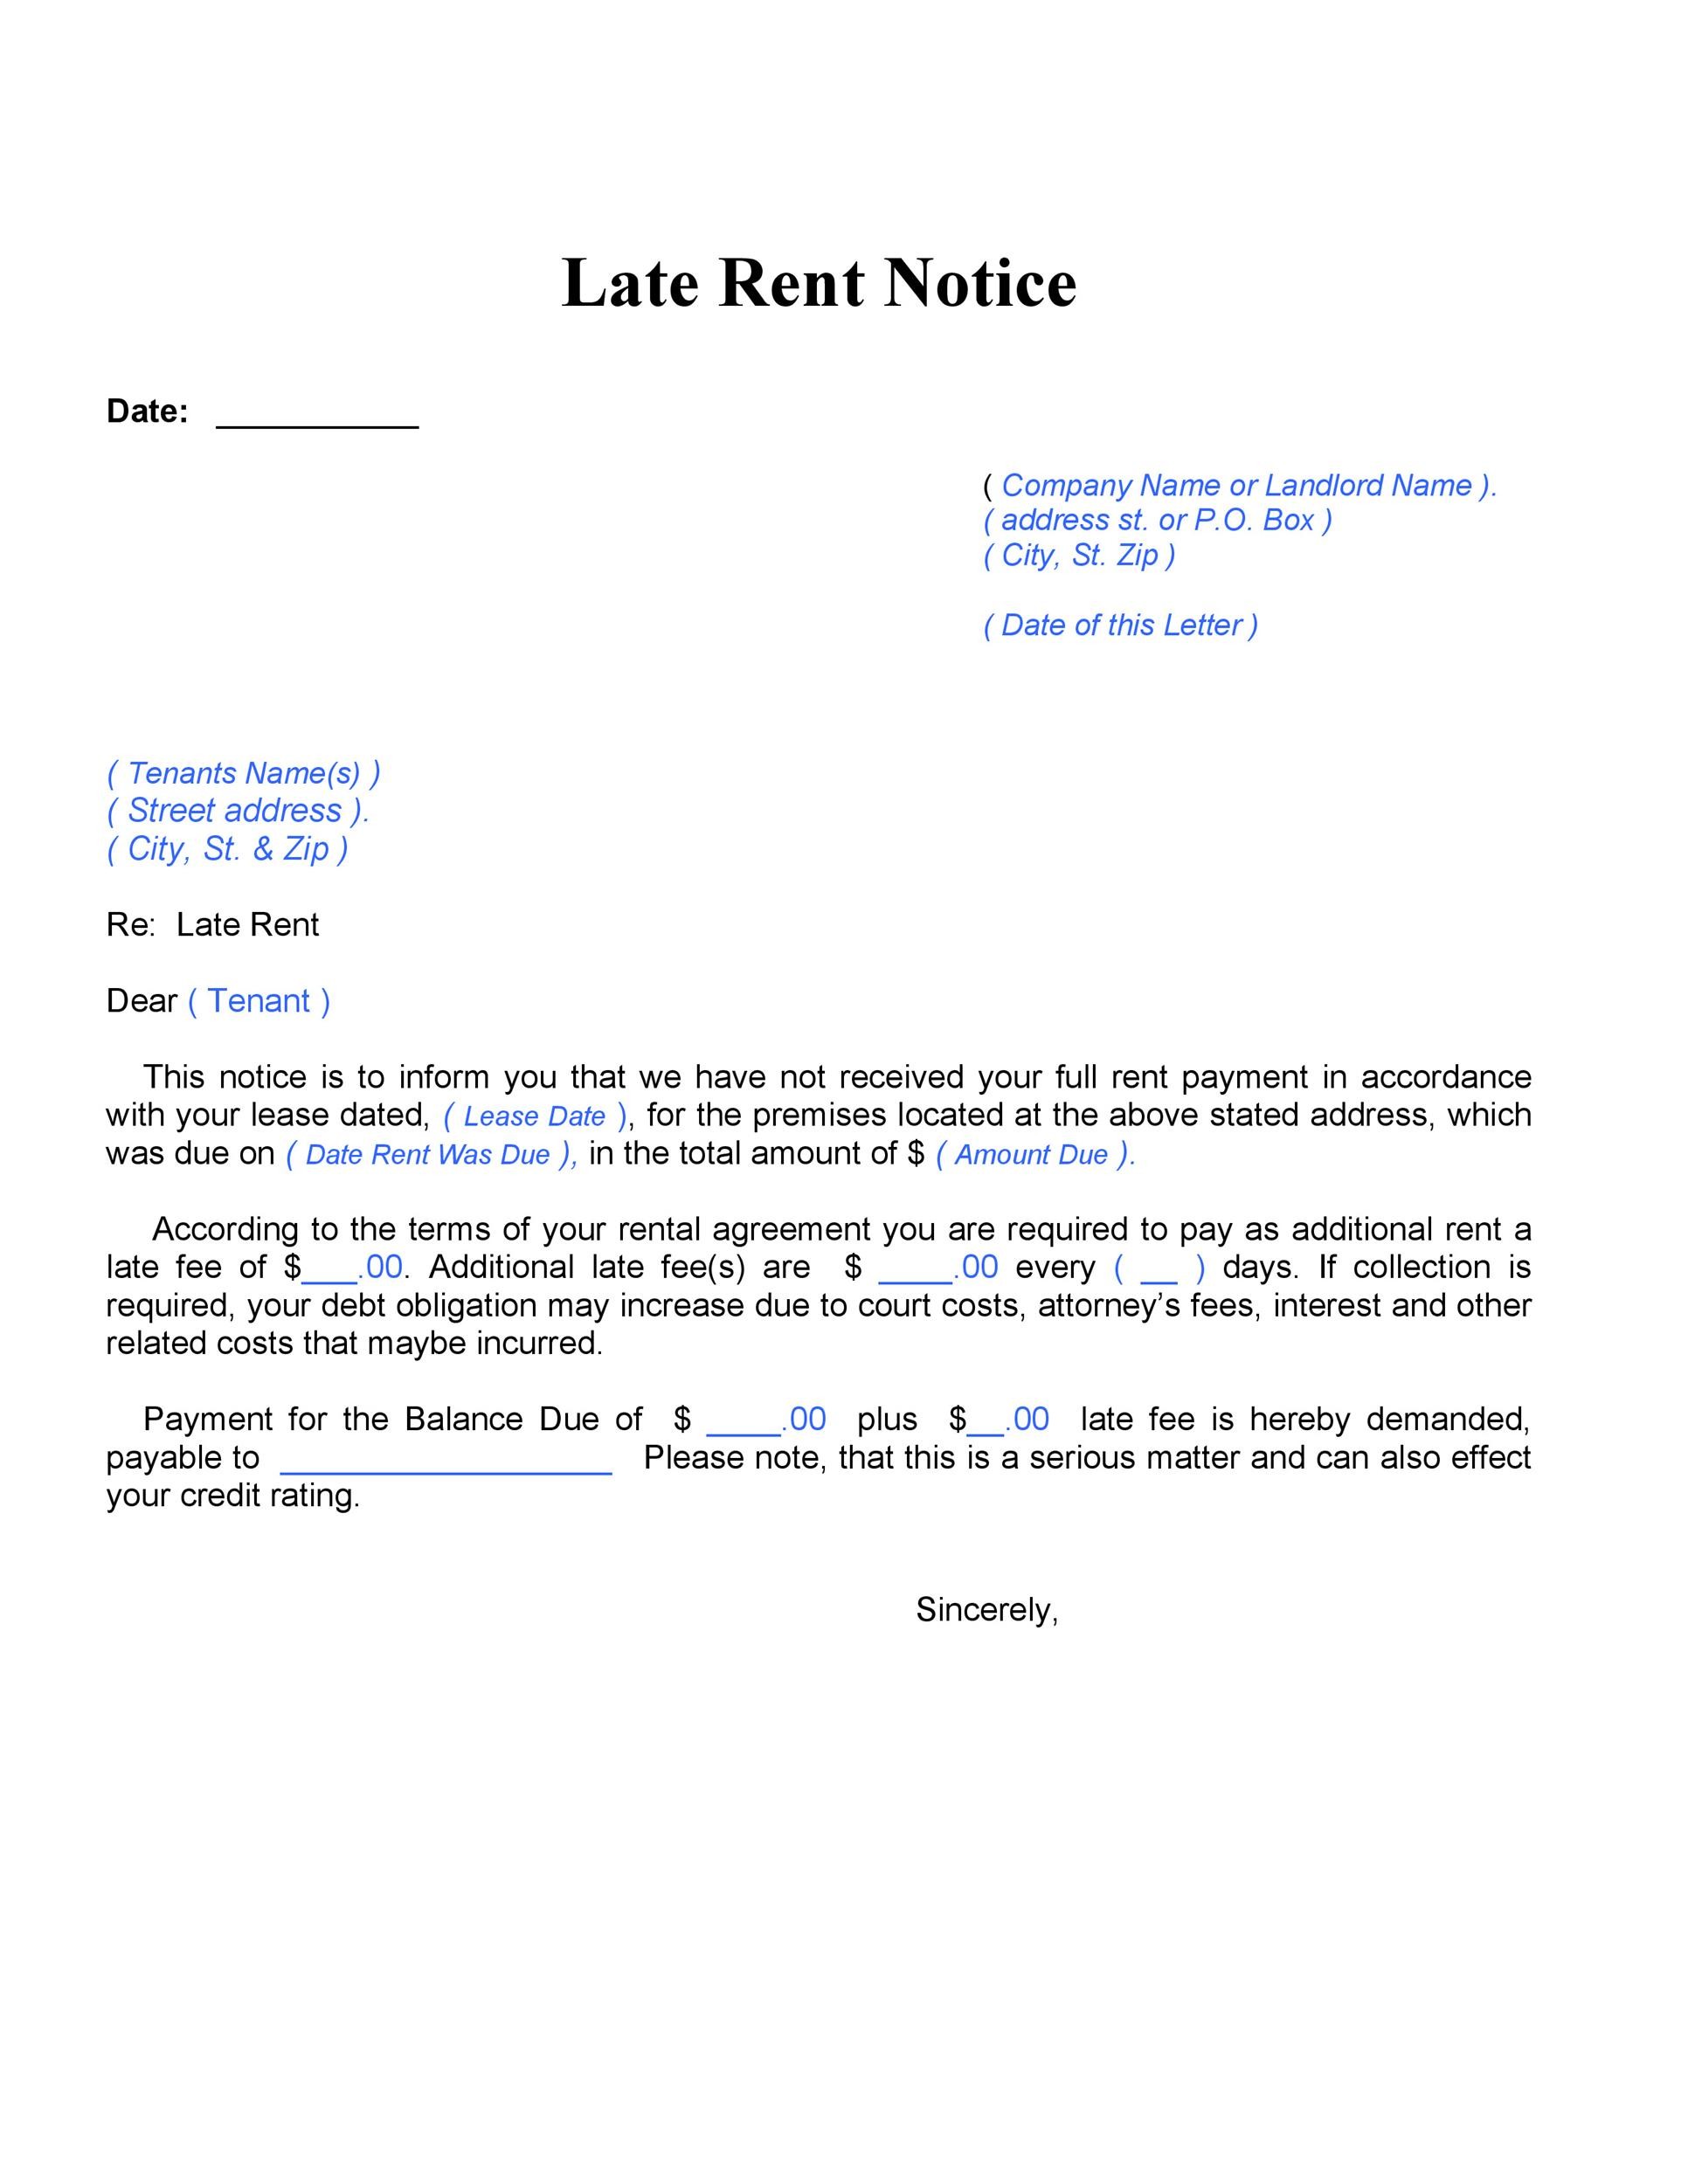 What Is A Late Rent Notice